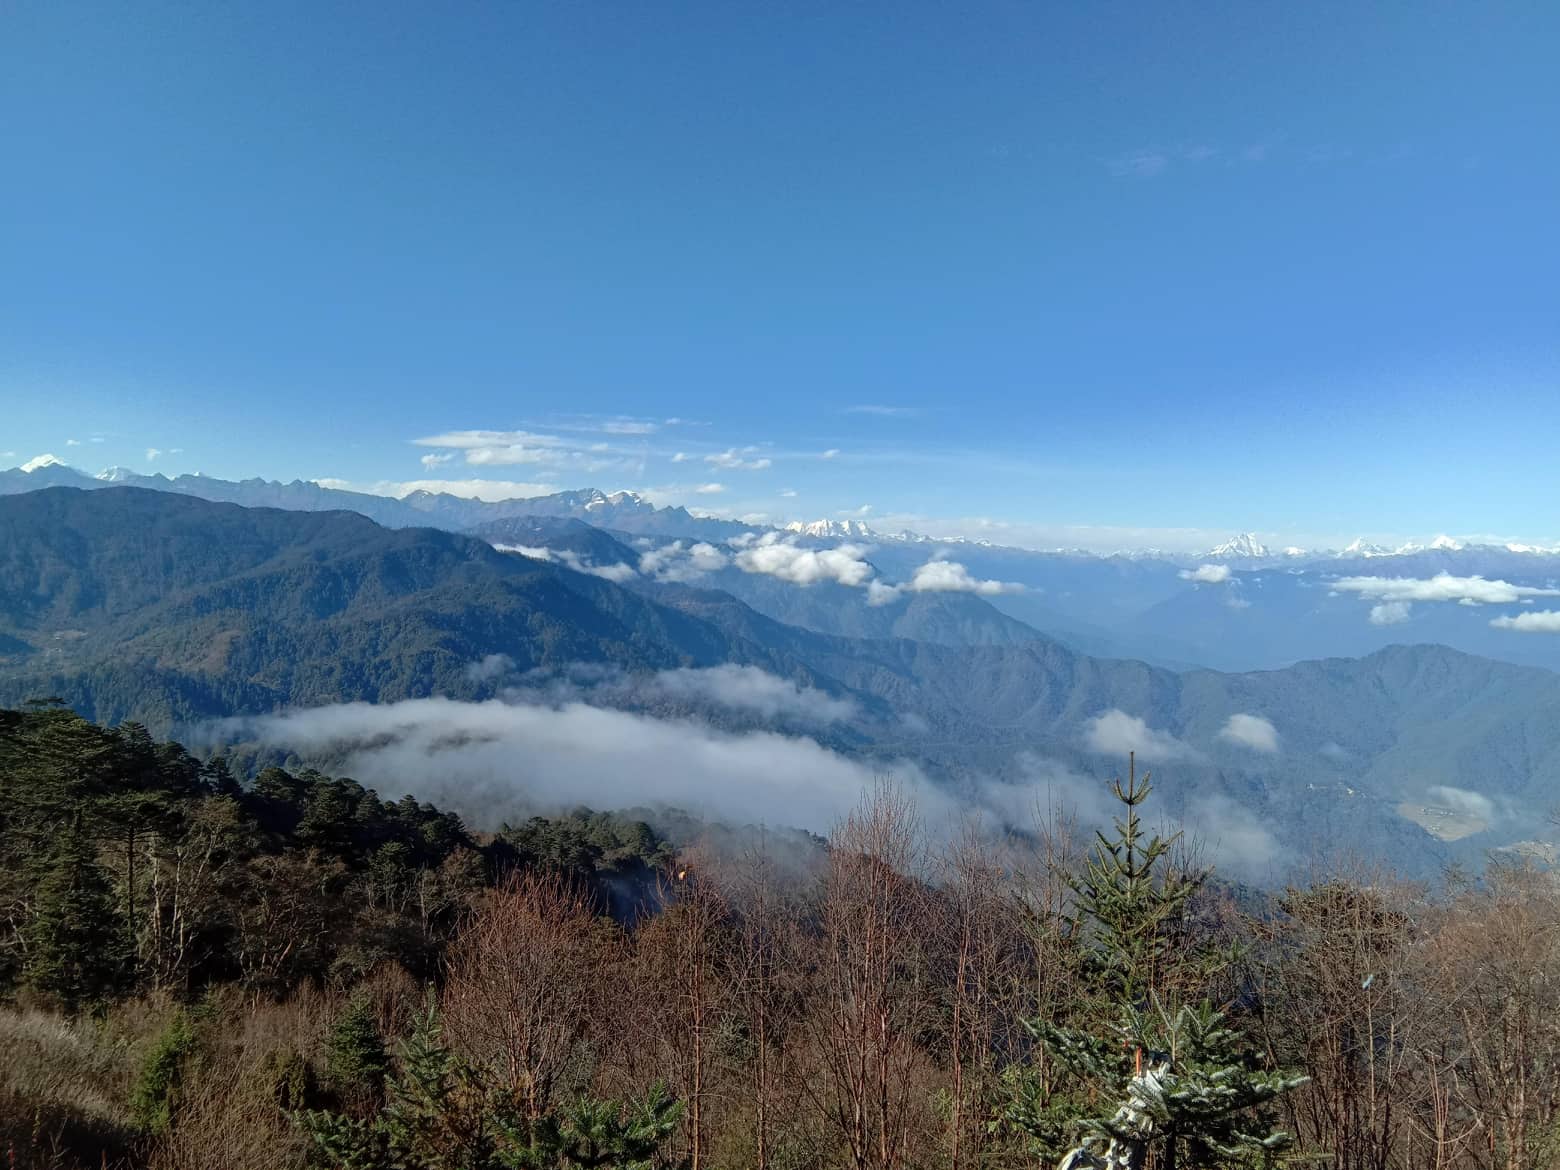 View of Bhutan from the top of the mountians